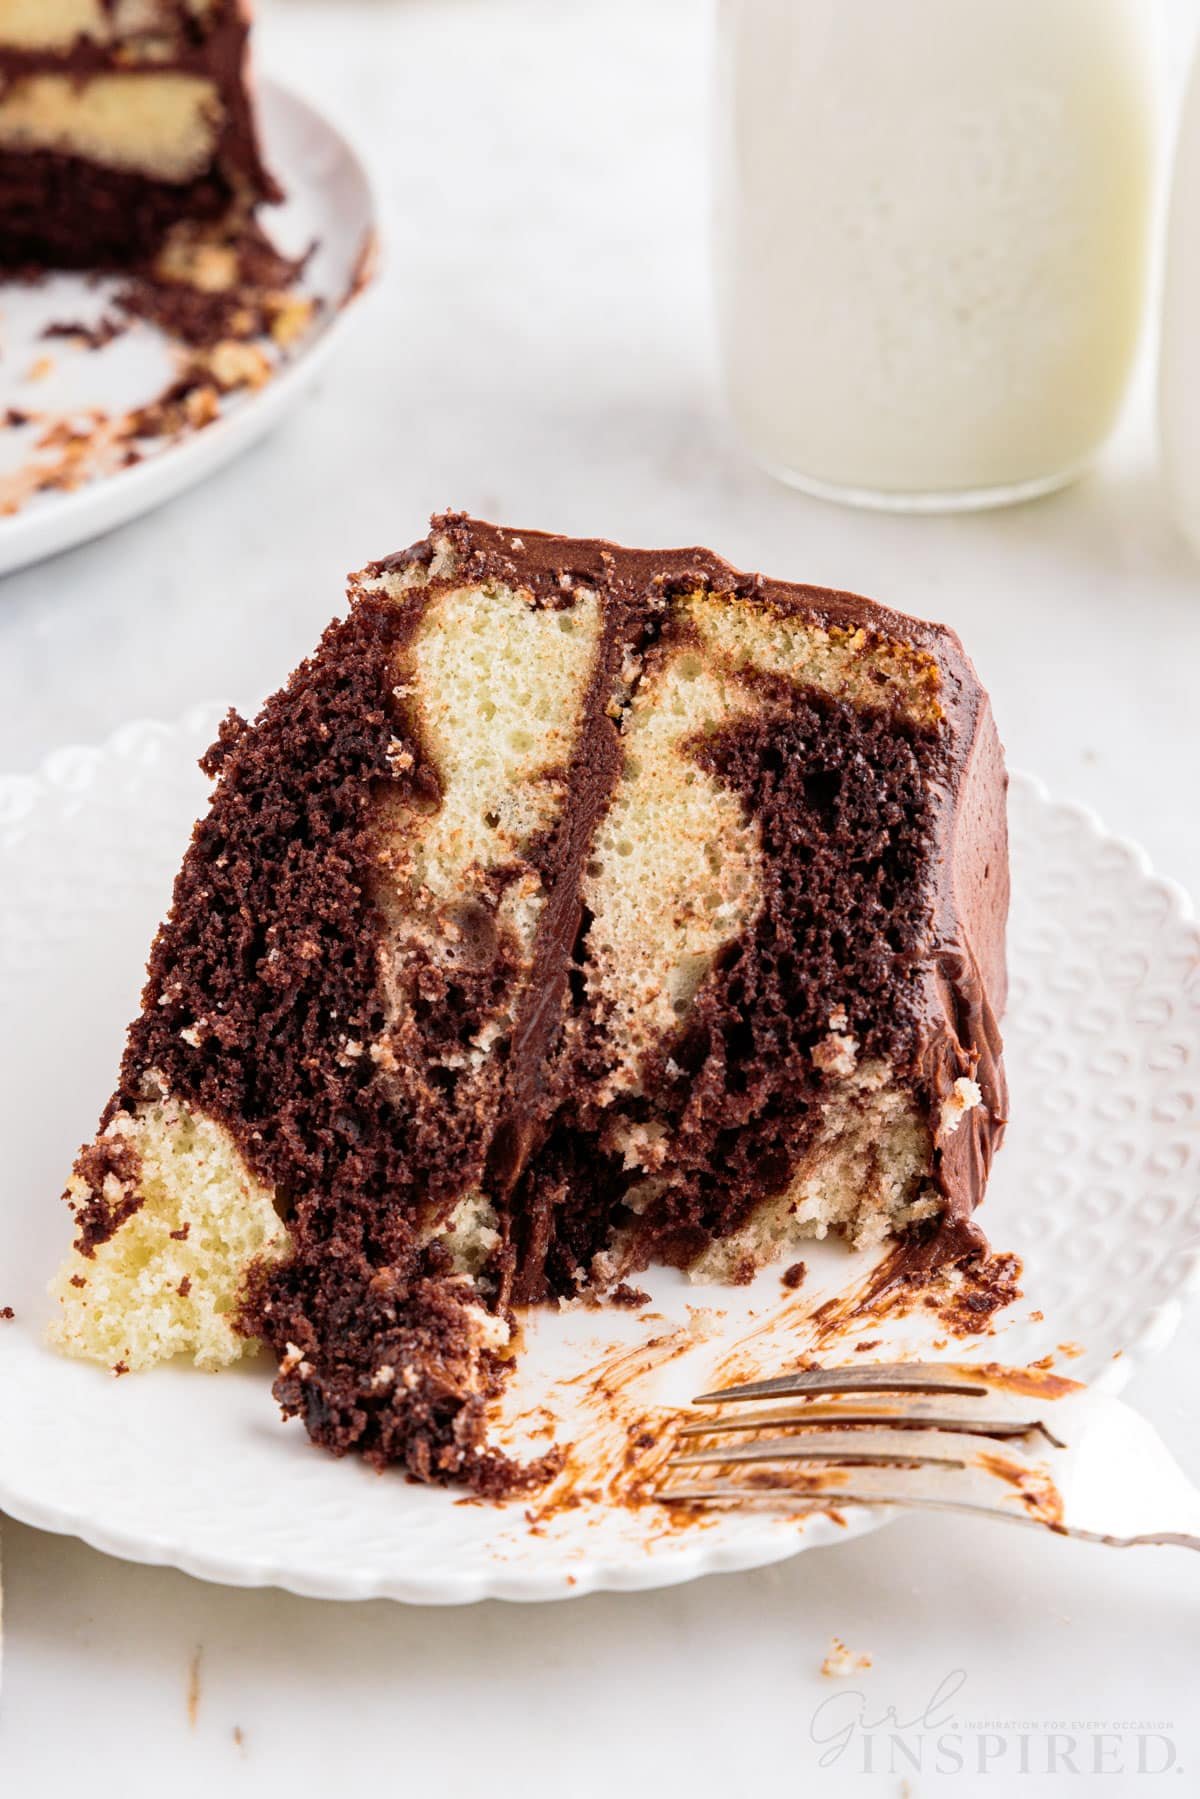 Slice of marble cake on a white serving plate with a metal fork, remaining marble cake and jug of milk in the background, on a marble countertop.